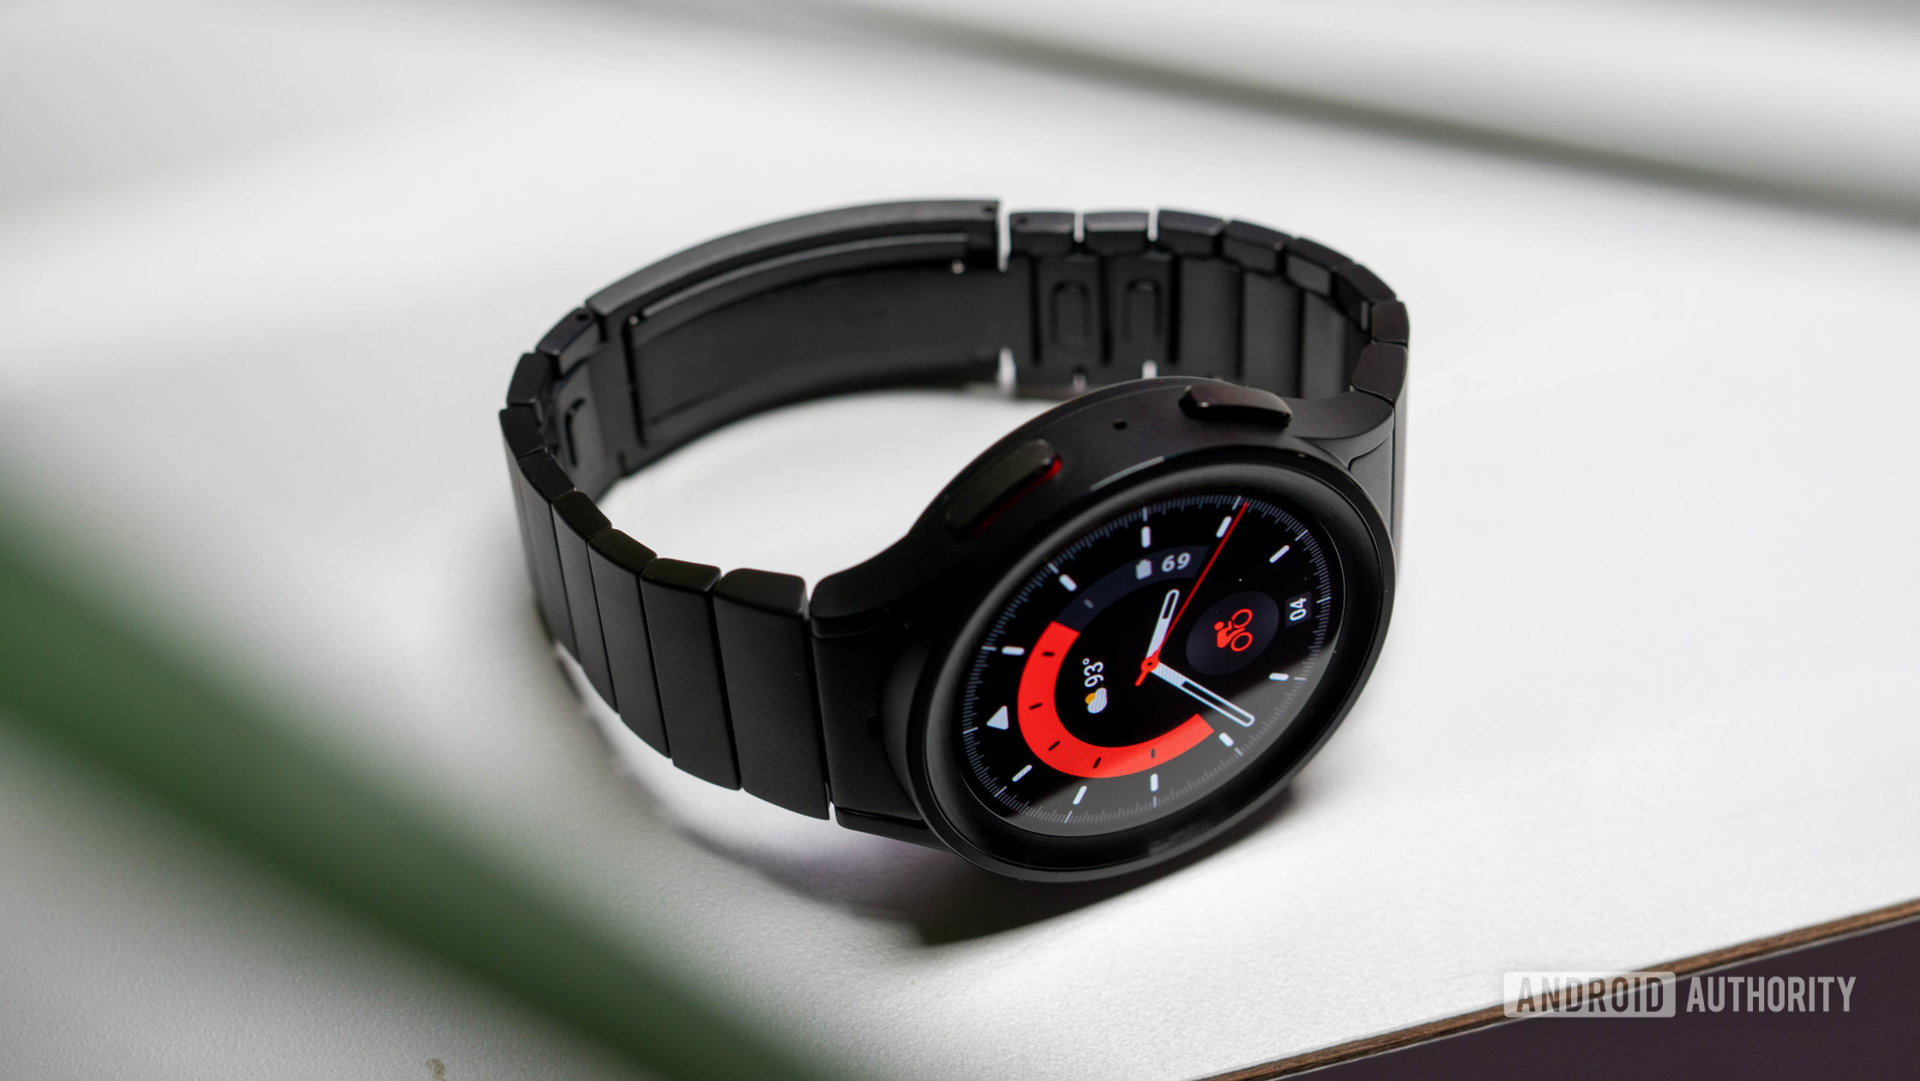 Samsung Galaxy Watch 5 Pro in black titanium color with black metal strap laying on table